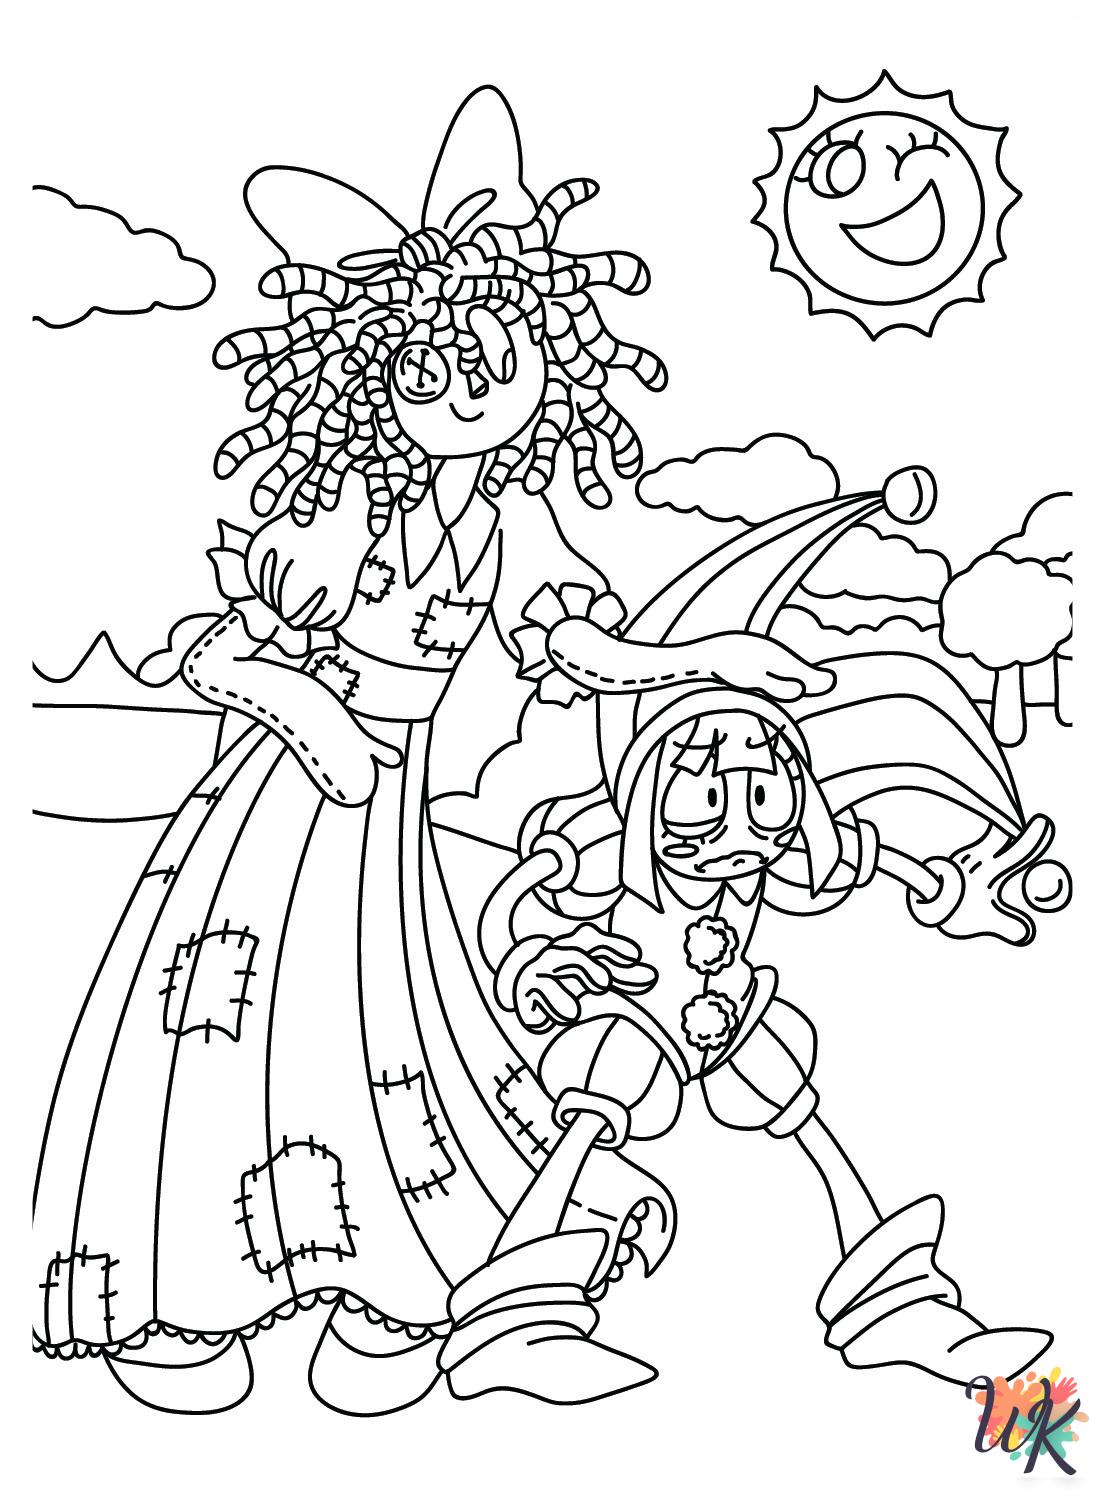 The Amazing Digital Circus coloring pages printable free